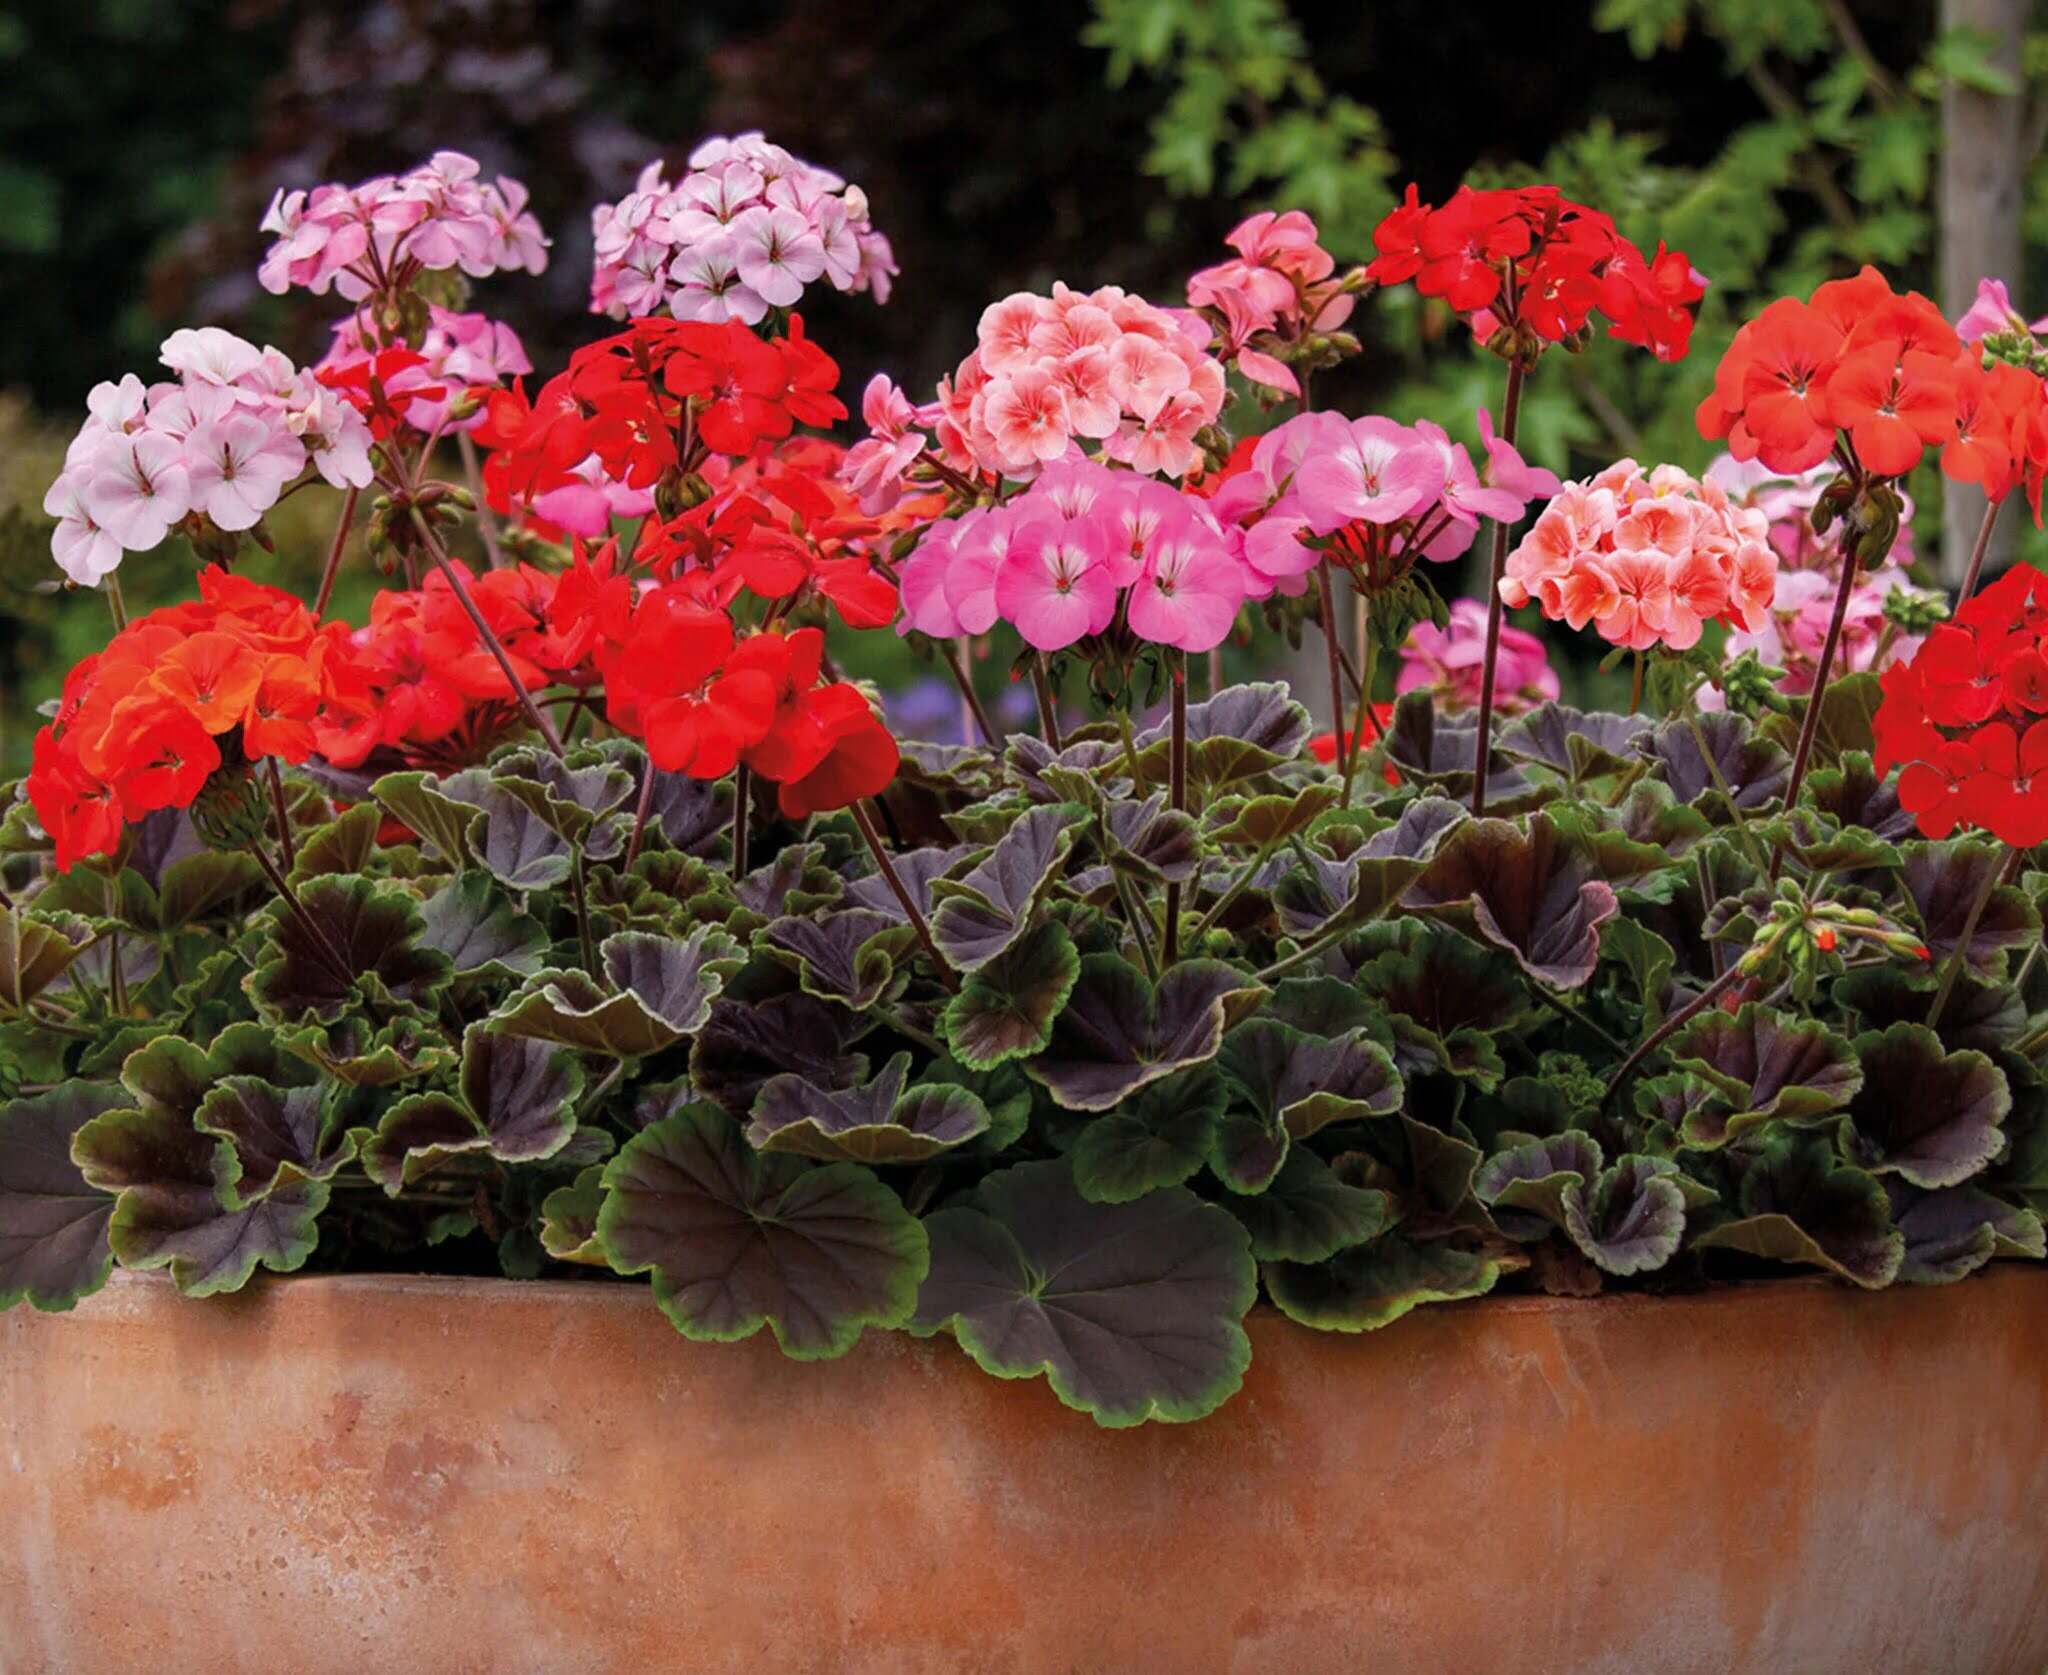 How To Grow Geraniums From Seed